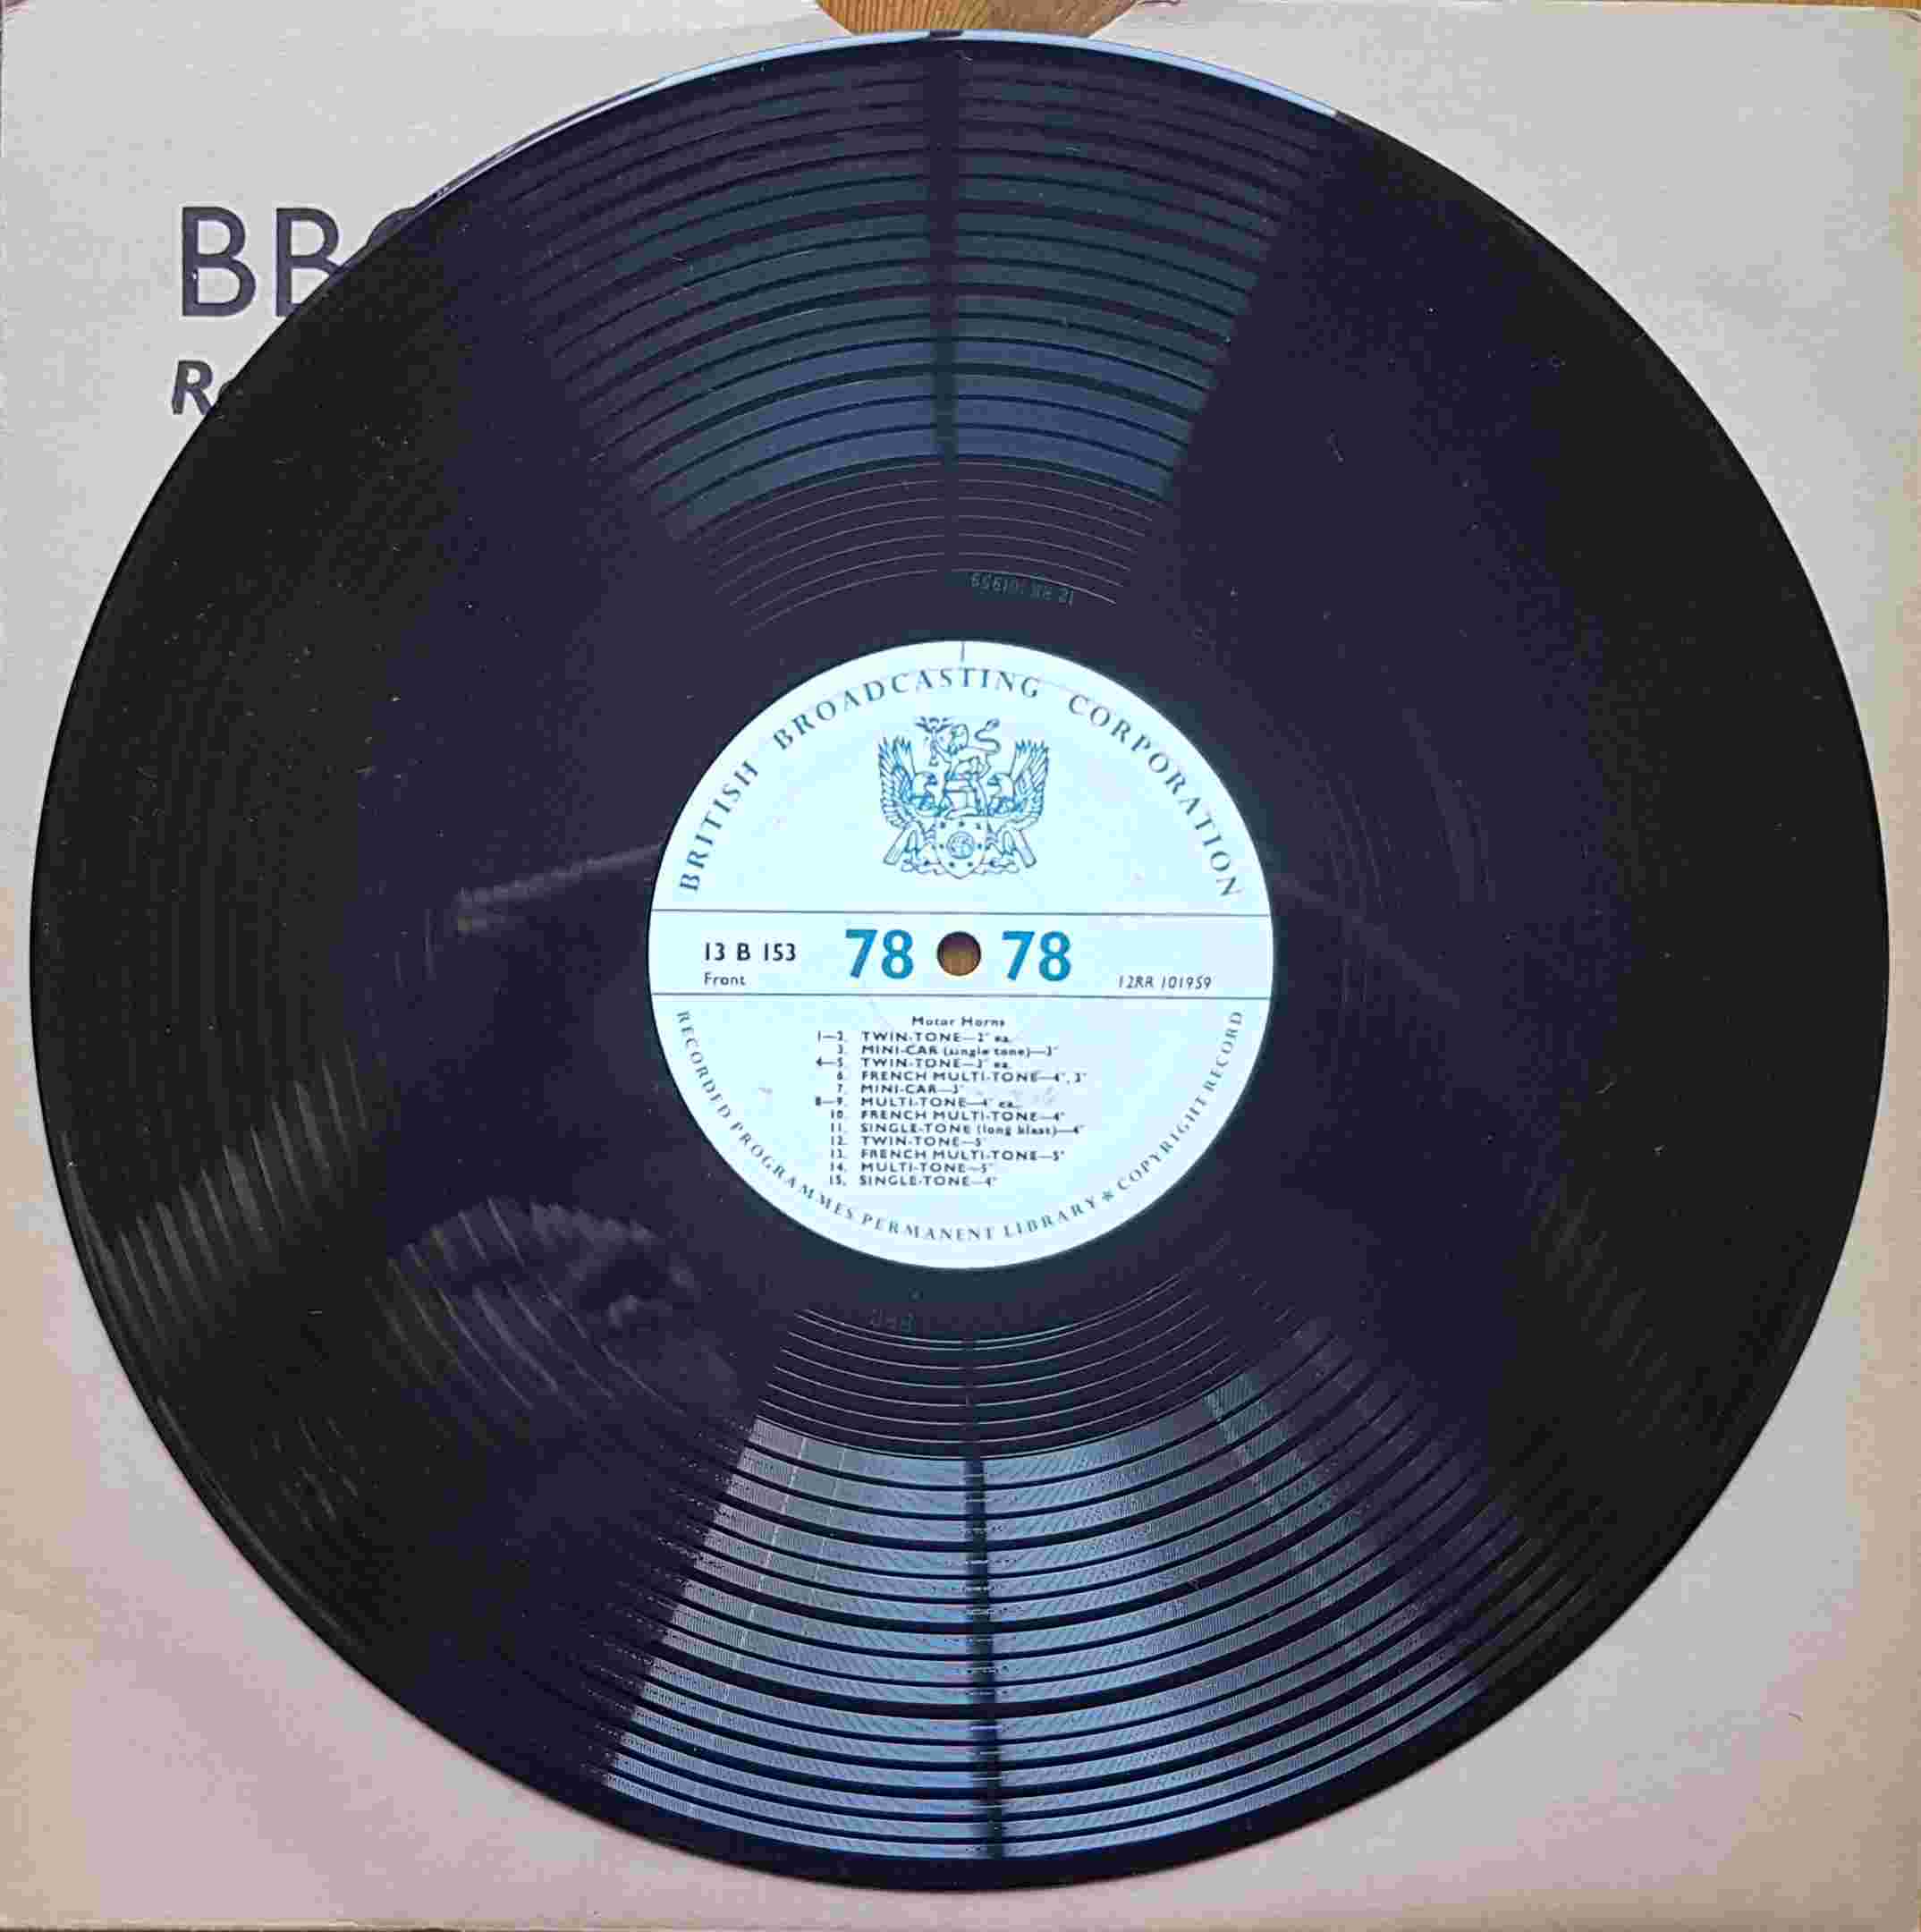 Picture of 13 B 153 Motor horns by artist Not registered from the BBC records and Tapes library